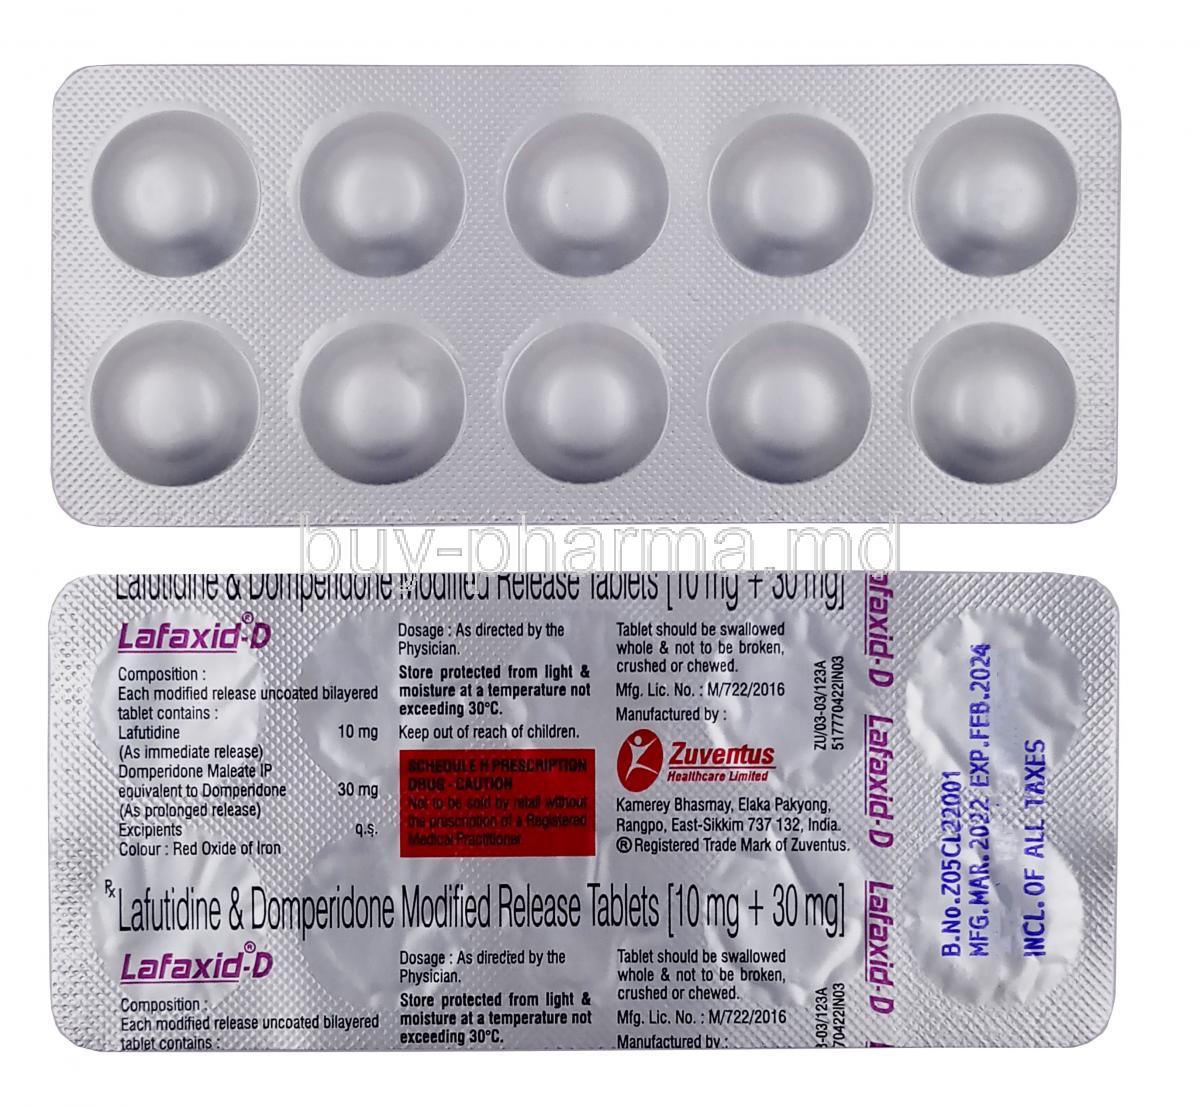 Lafaxid-D,Lafutidine 10mg/ Domperidone 20mg,Zuventus Healthcare, Blisterpack front and back view